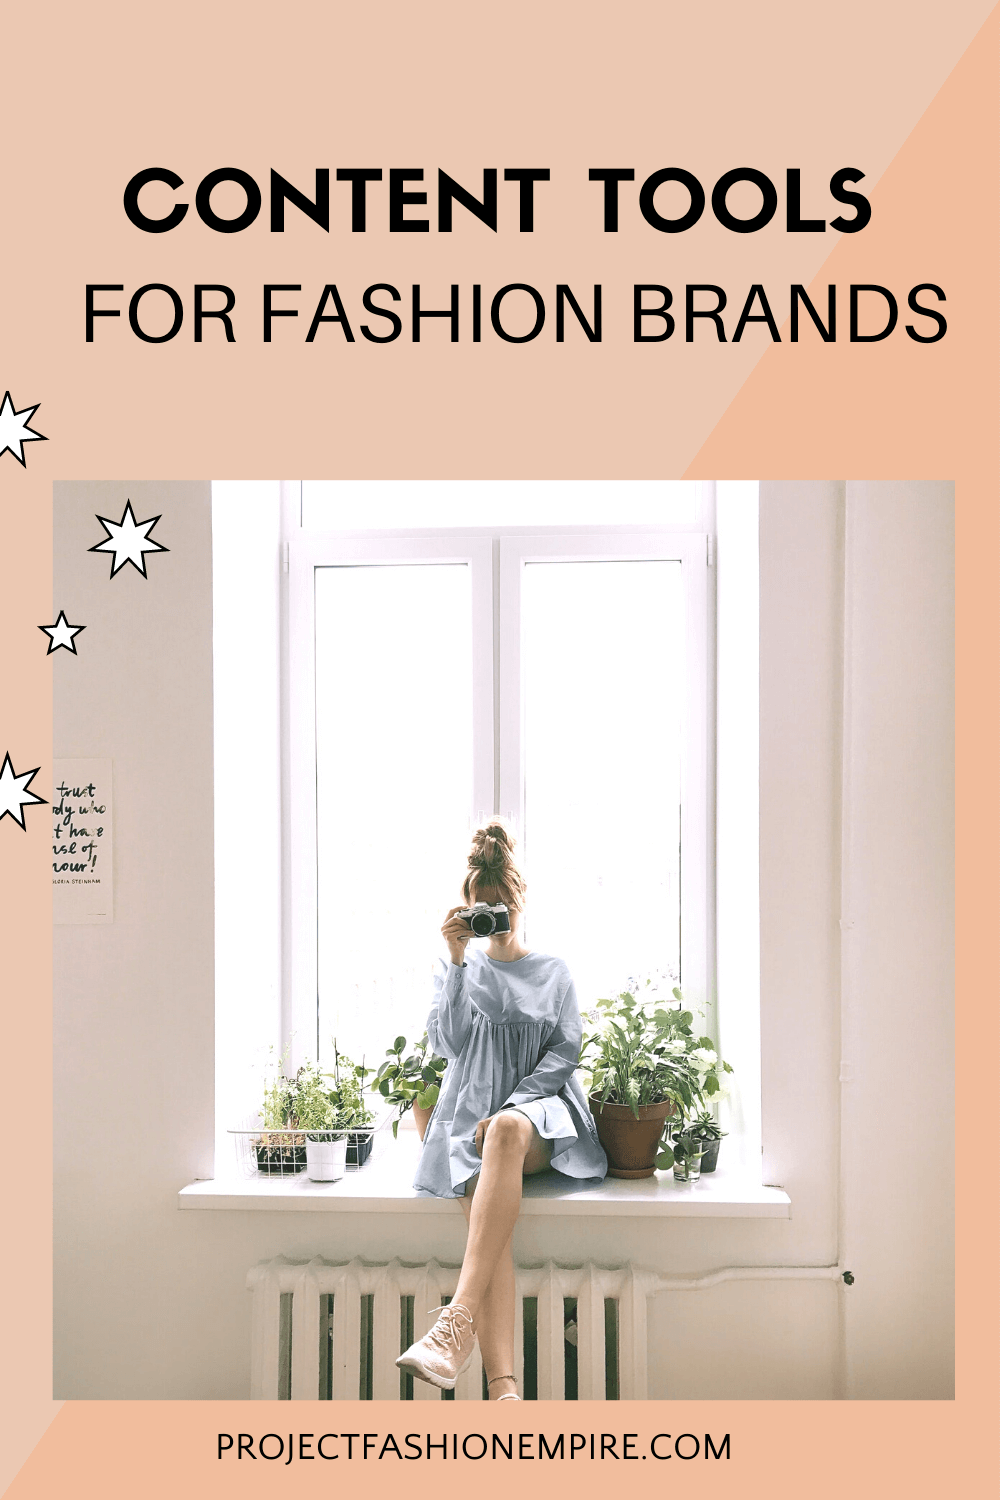 Social media marketing for fashion brands : create endless fashion content ideas for fashion brands, fashion designers, fashion entrepreneurs, clothing brands. Learn how to grow instagram with Instagram fashion post ideas and Instagram fashion captions.